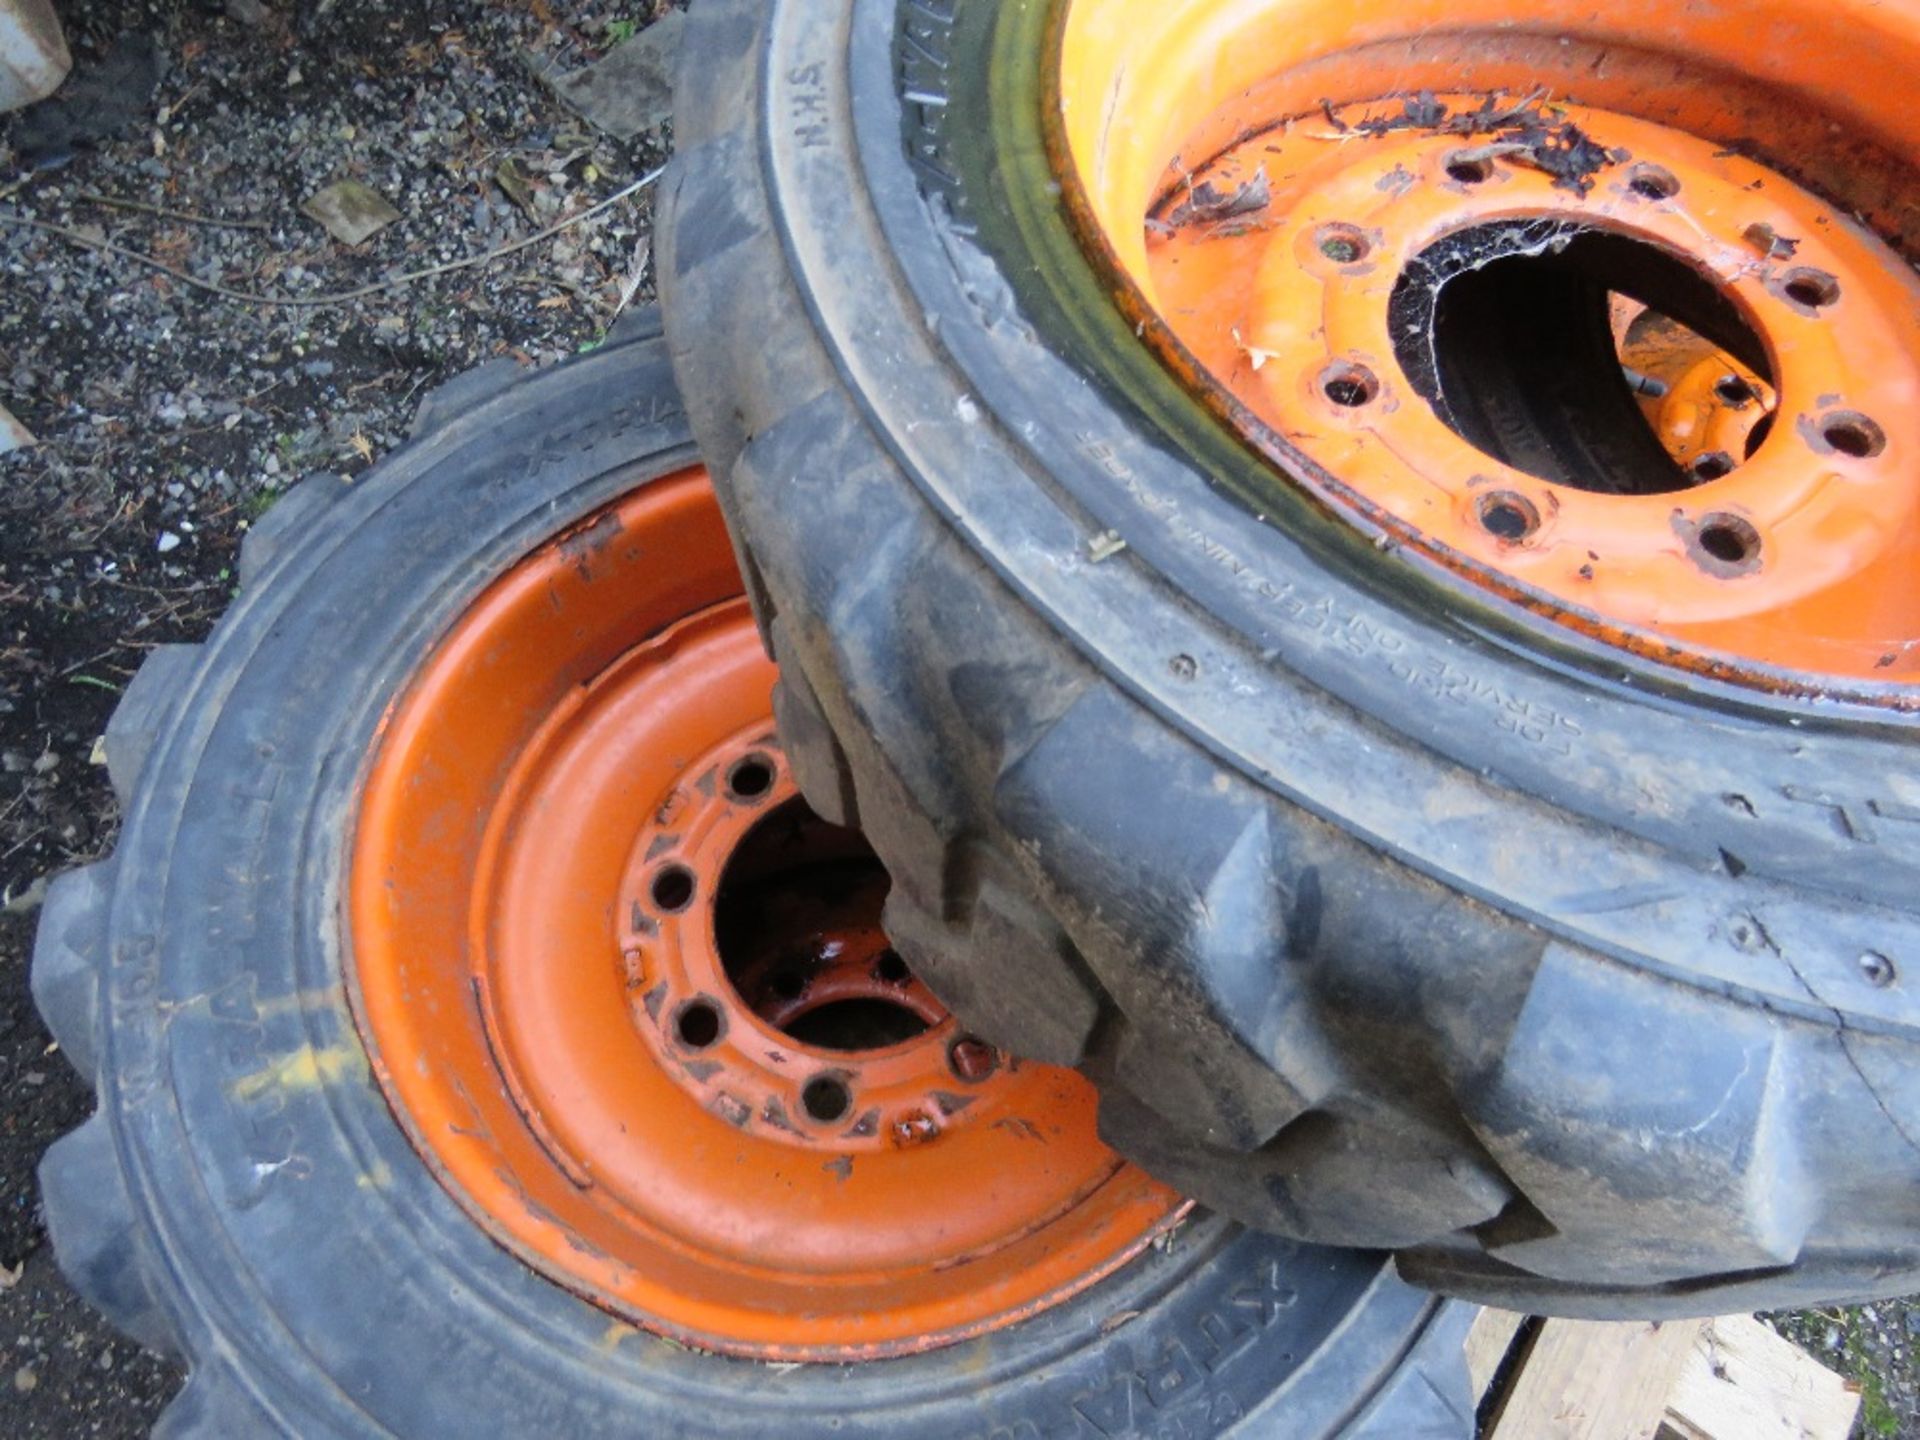 5NO SKID STEER LOADER WHEELS AND TYRES 10-16.5 SIZE. DIRECT FROM LOCAL SMALLHOLDING. THIS LOT IS - Image 3 of 5